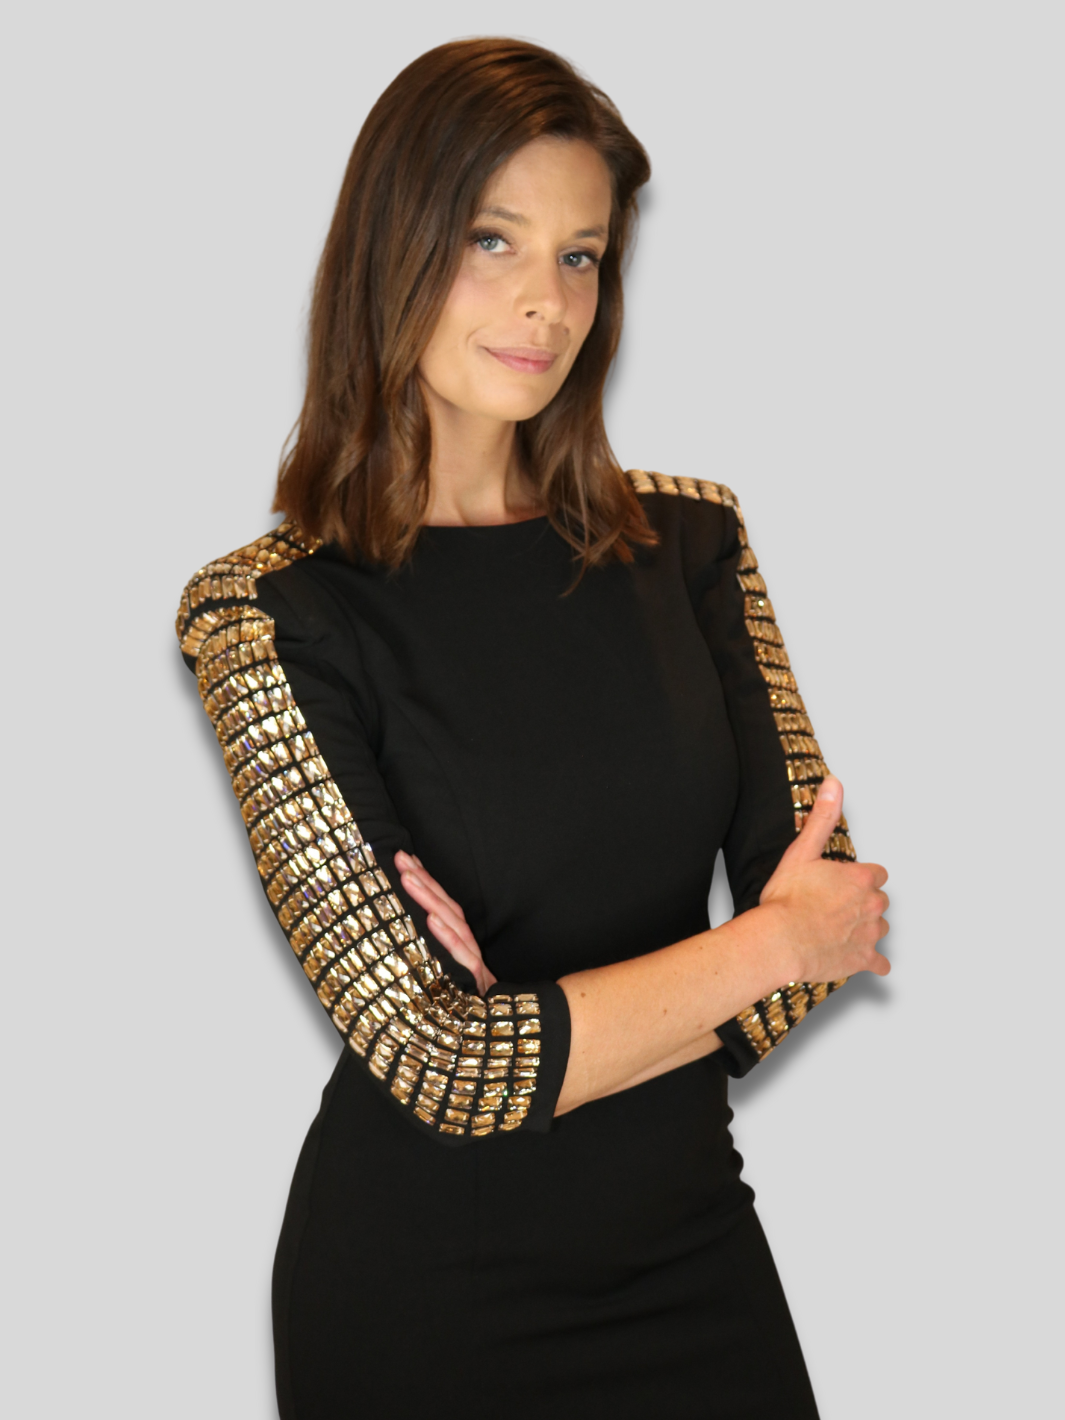 4ever Stunning Deluxe Premium black midi dress with gold rhinestone jeweled arms and chunky gold back zip fastening. Model faces the camera and folds her arms. Her rhinestone sleeved arms are visible.